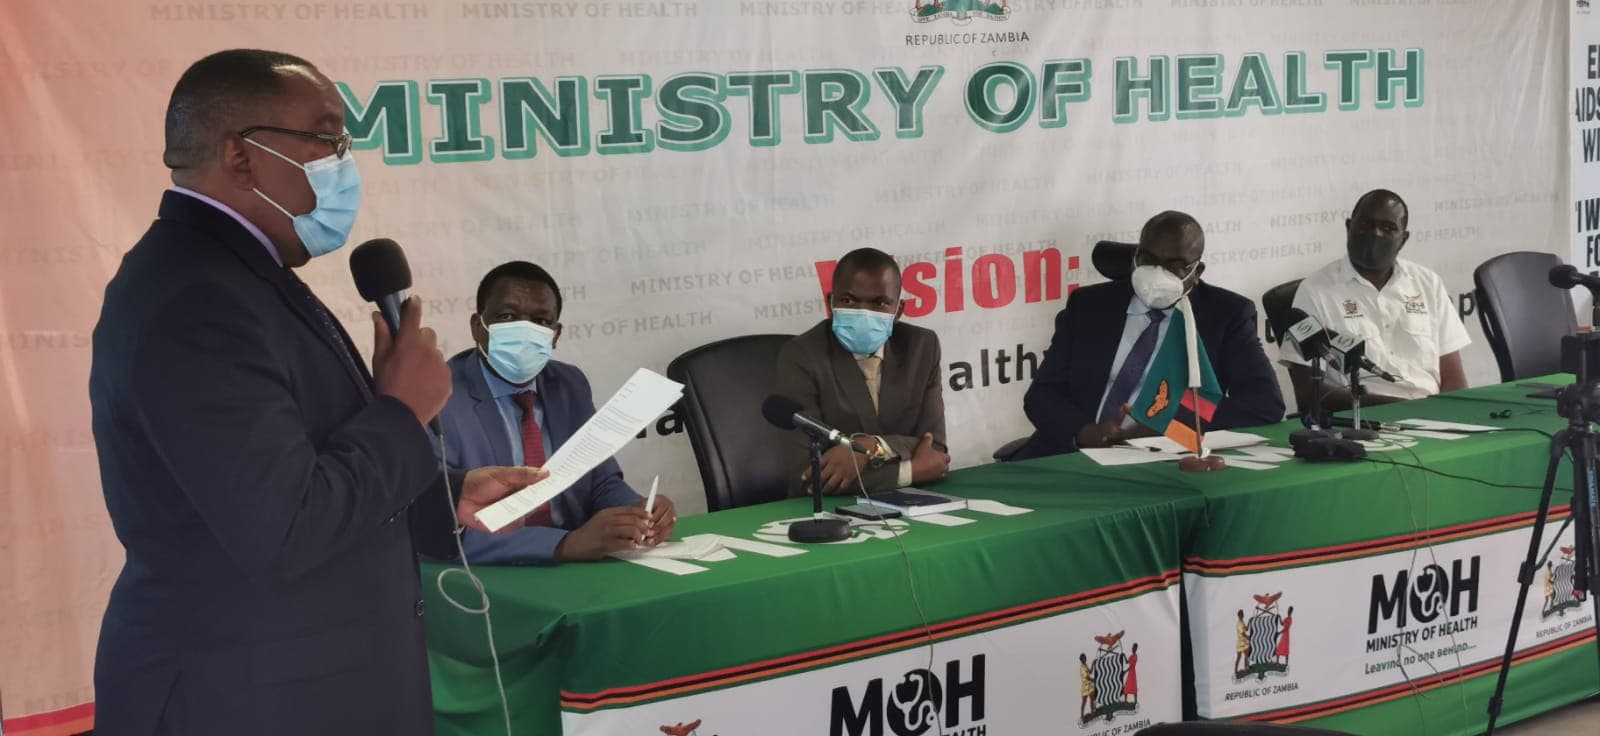 Dalbit Petroleum, Belgravia Services Limited, and Ndola Energy Company Limited Offers US$200,000 Donation to Beit-CURE and Zambian Ministry of Health